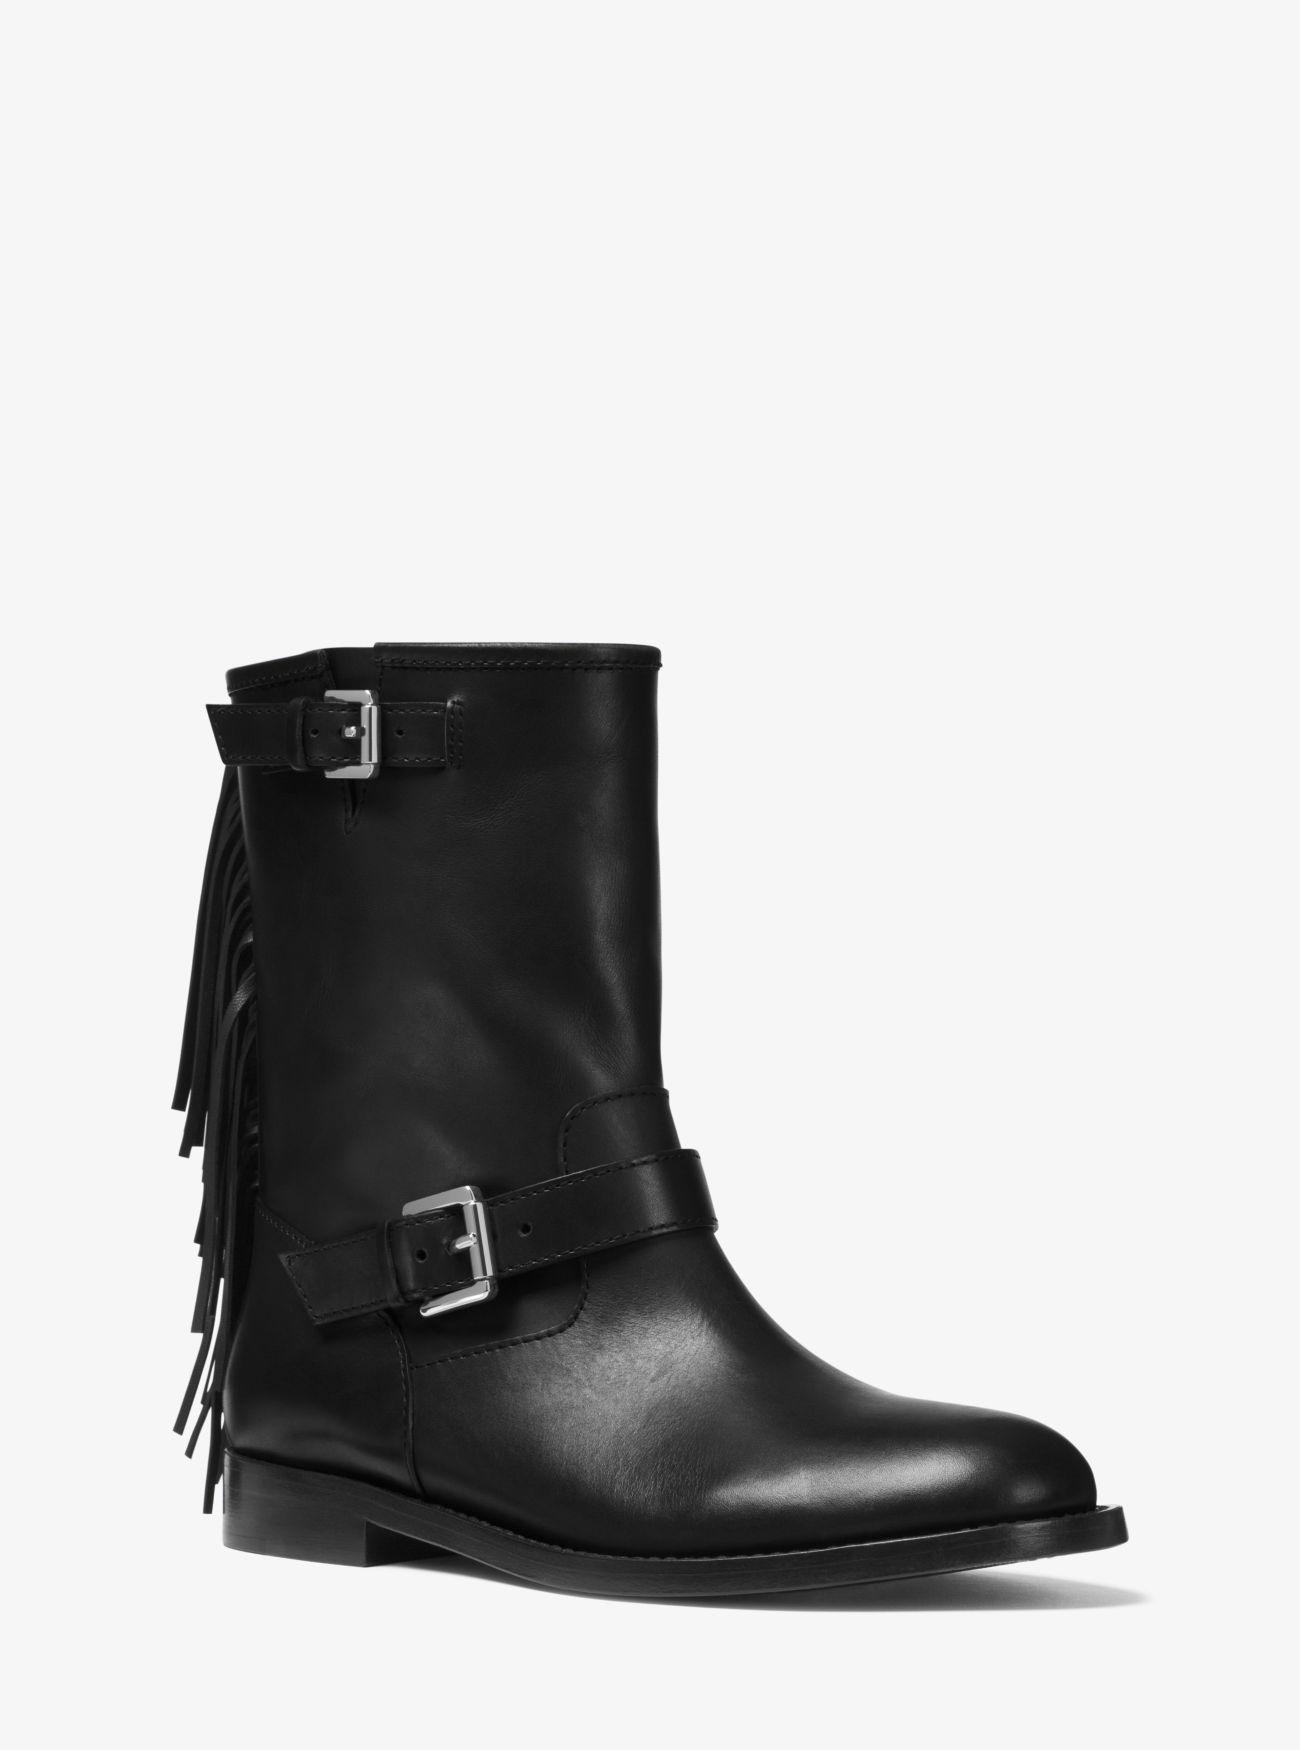 Michael Kors Ingrid Fringed Leather Boot in Black - Save 50% - Lyst